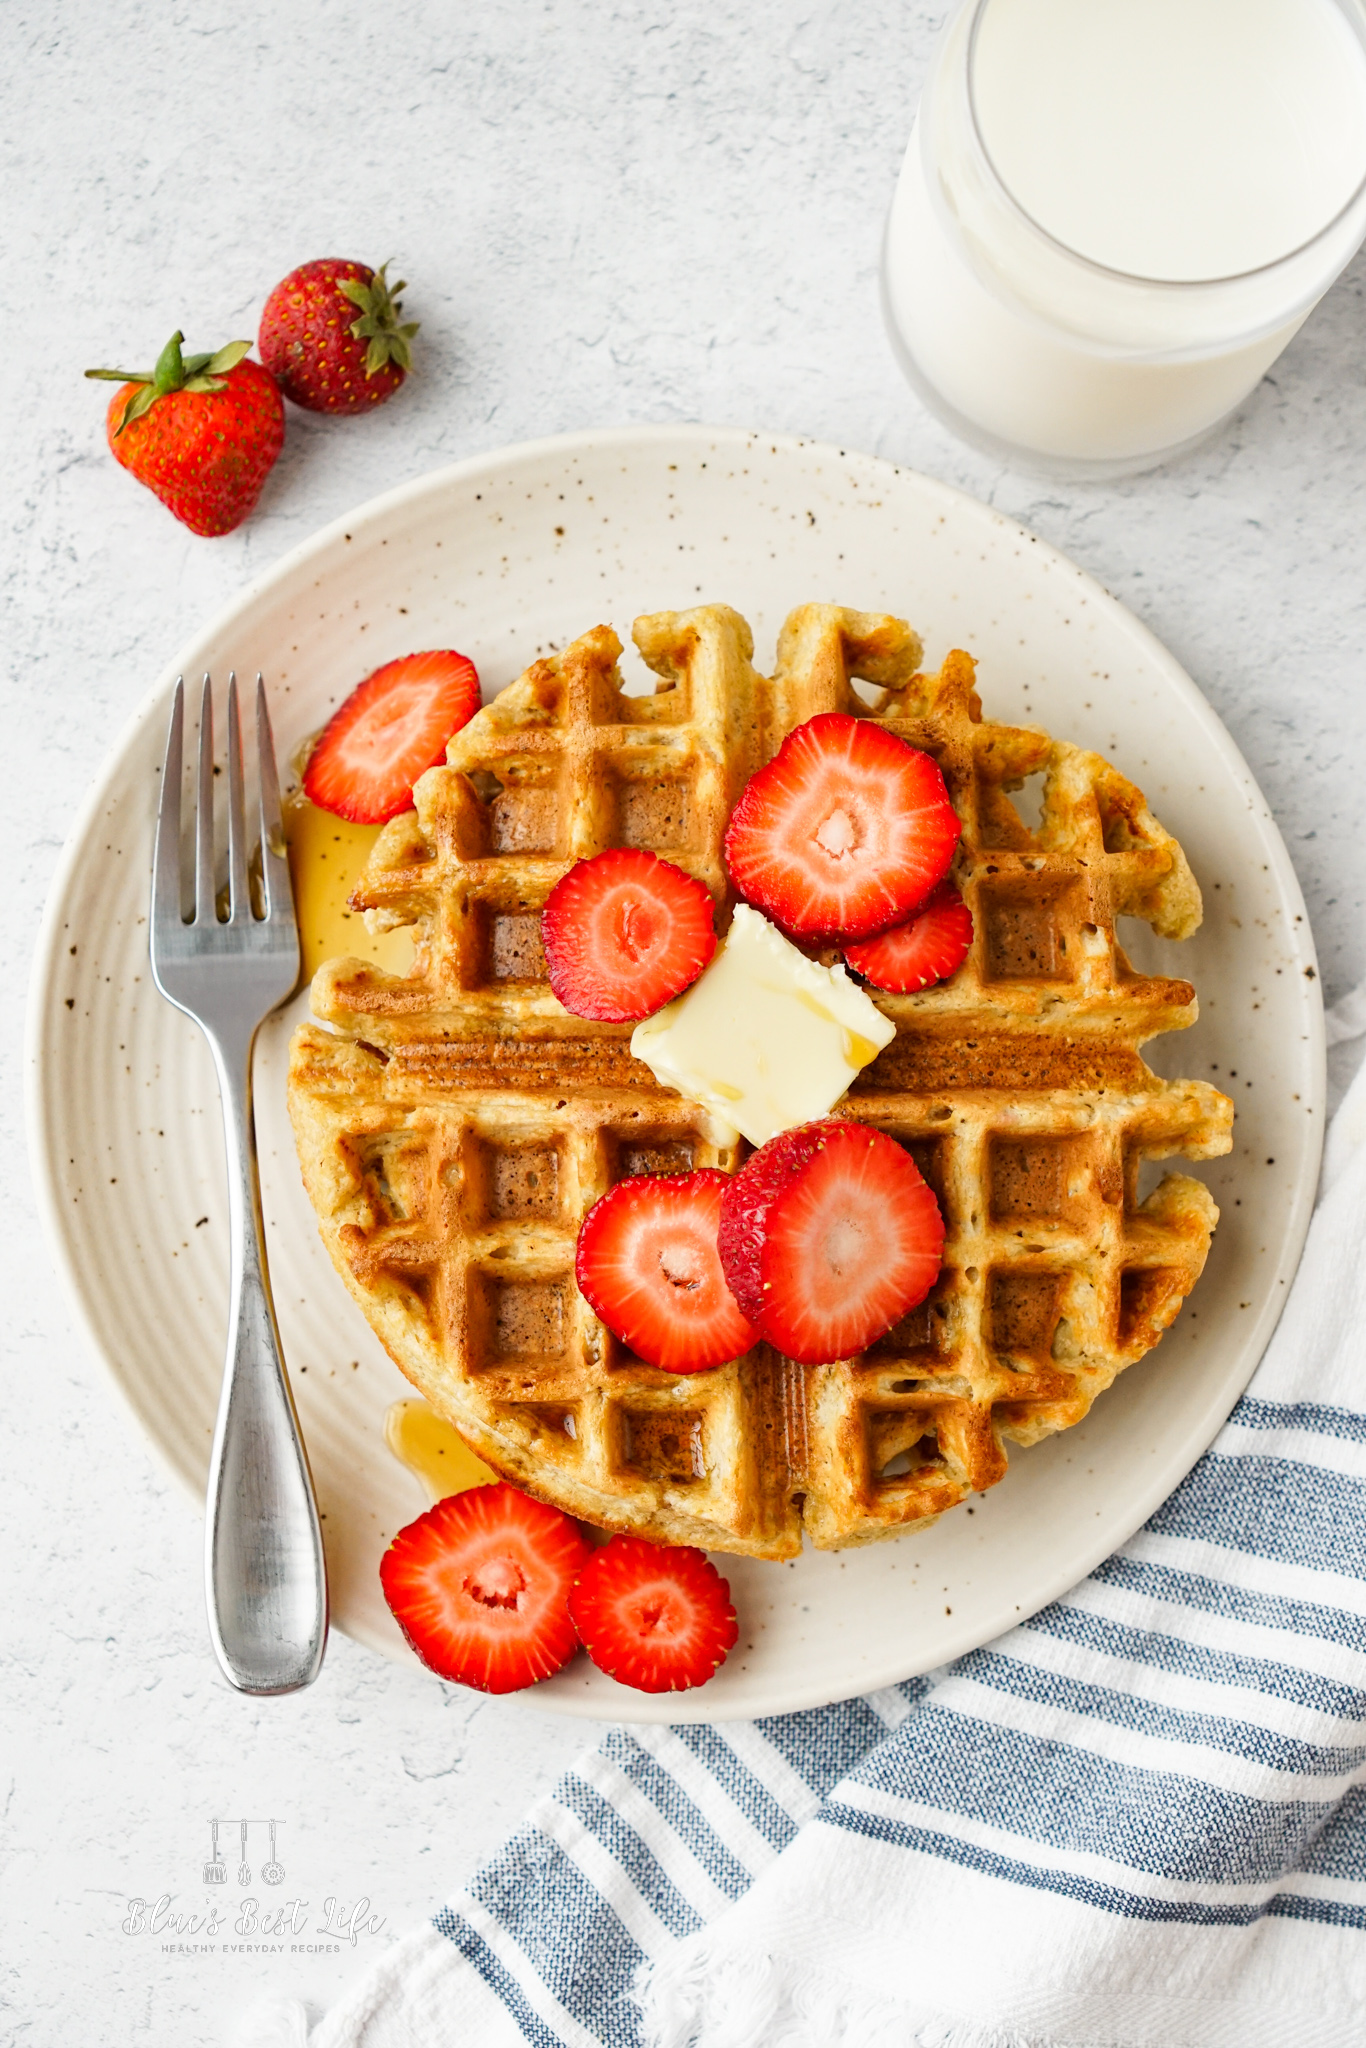 The waffles with strawberries, butter and syrup.